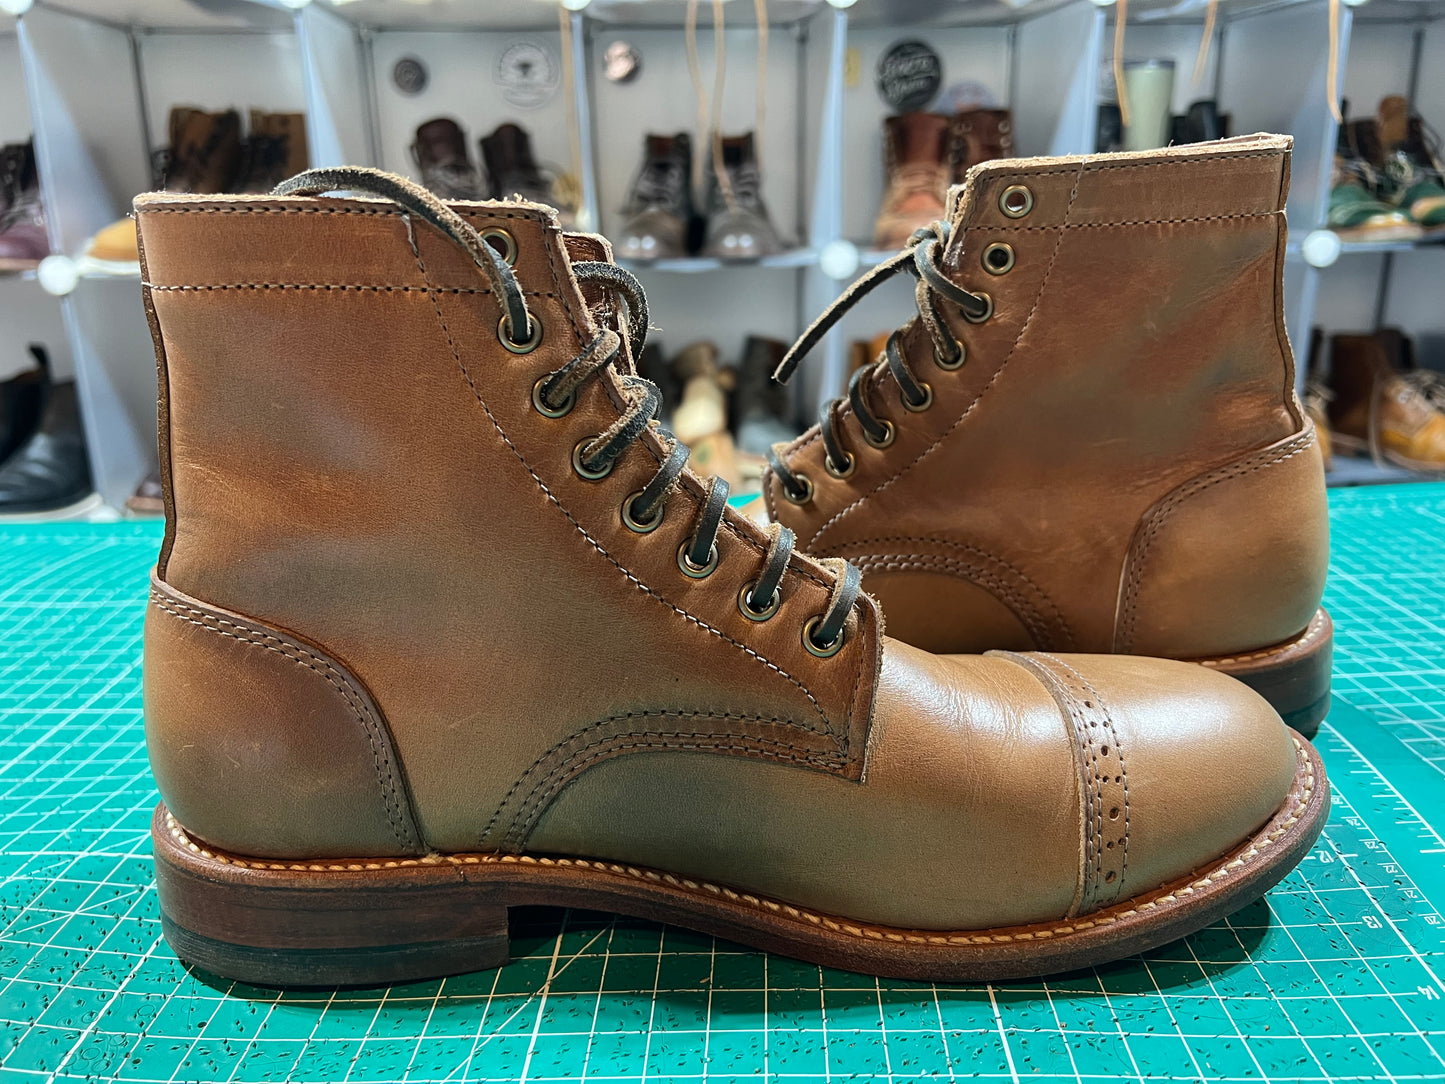 Oak Street Trench Boots Natural Chromexcel 8.5D